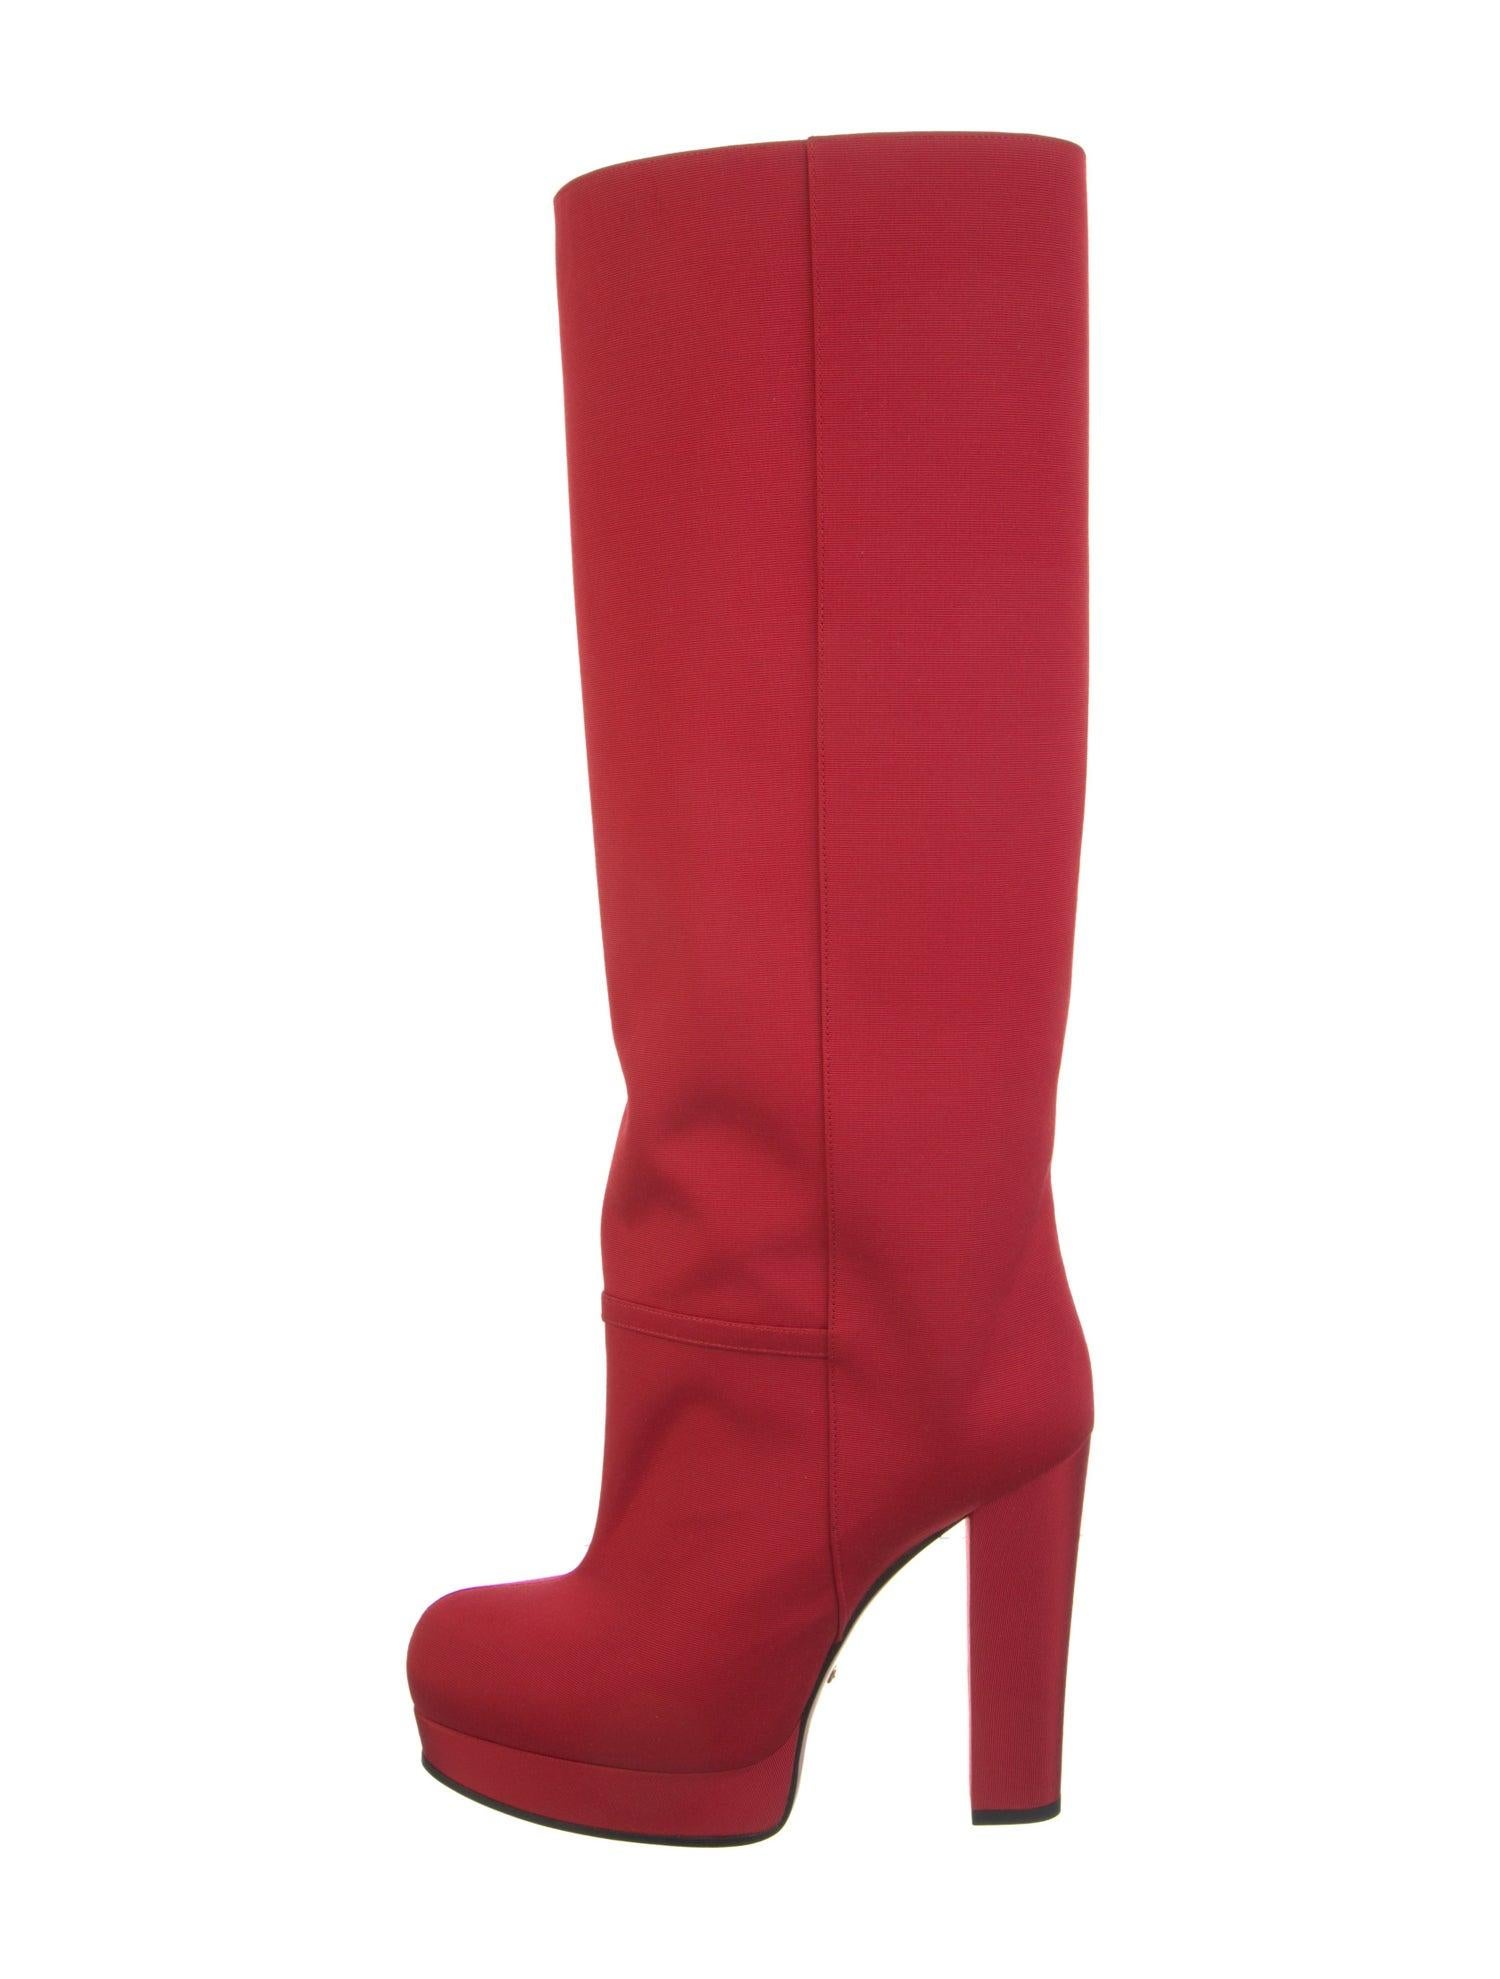 New With Box Gucci Fall 2019 Alessandro Michele Red Boots Sz 36.5 5